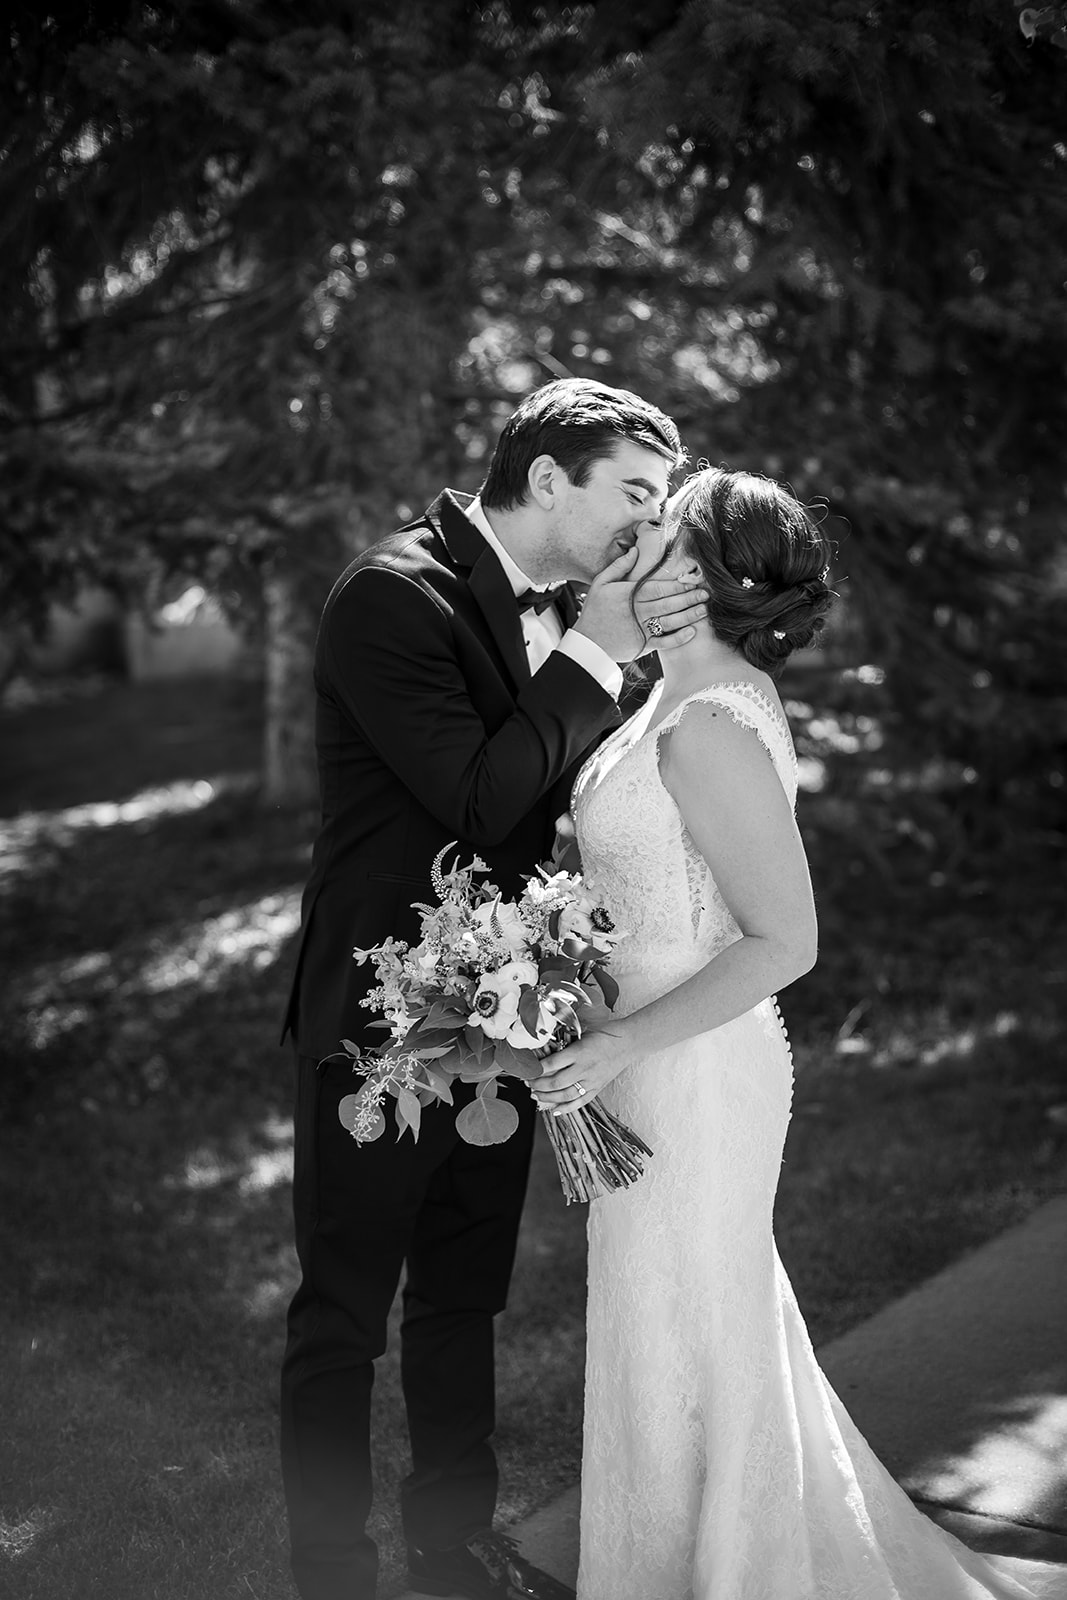 Bride and groom share a sweet kiss.